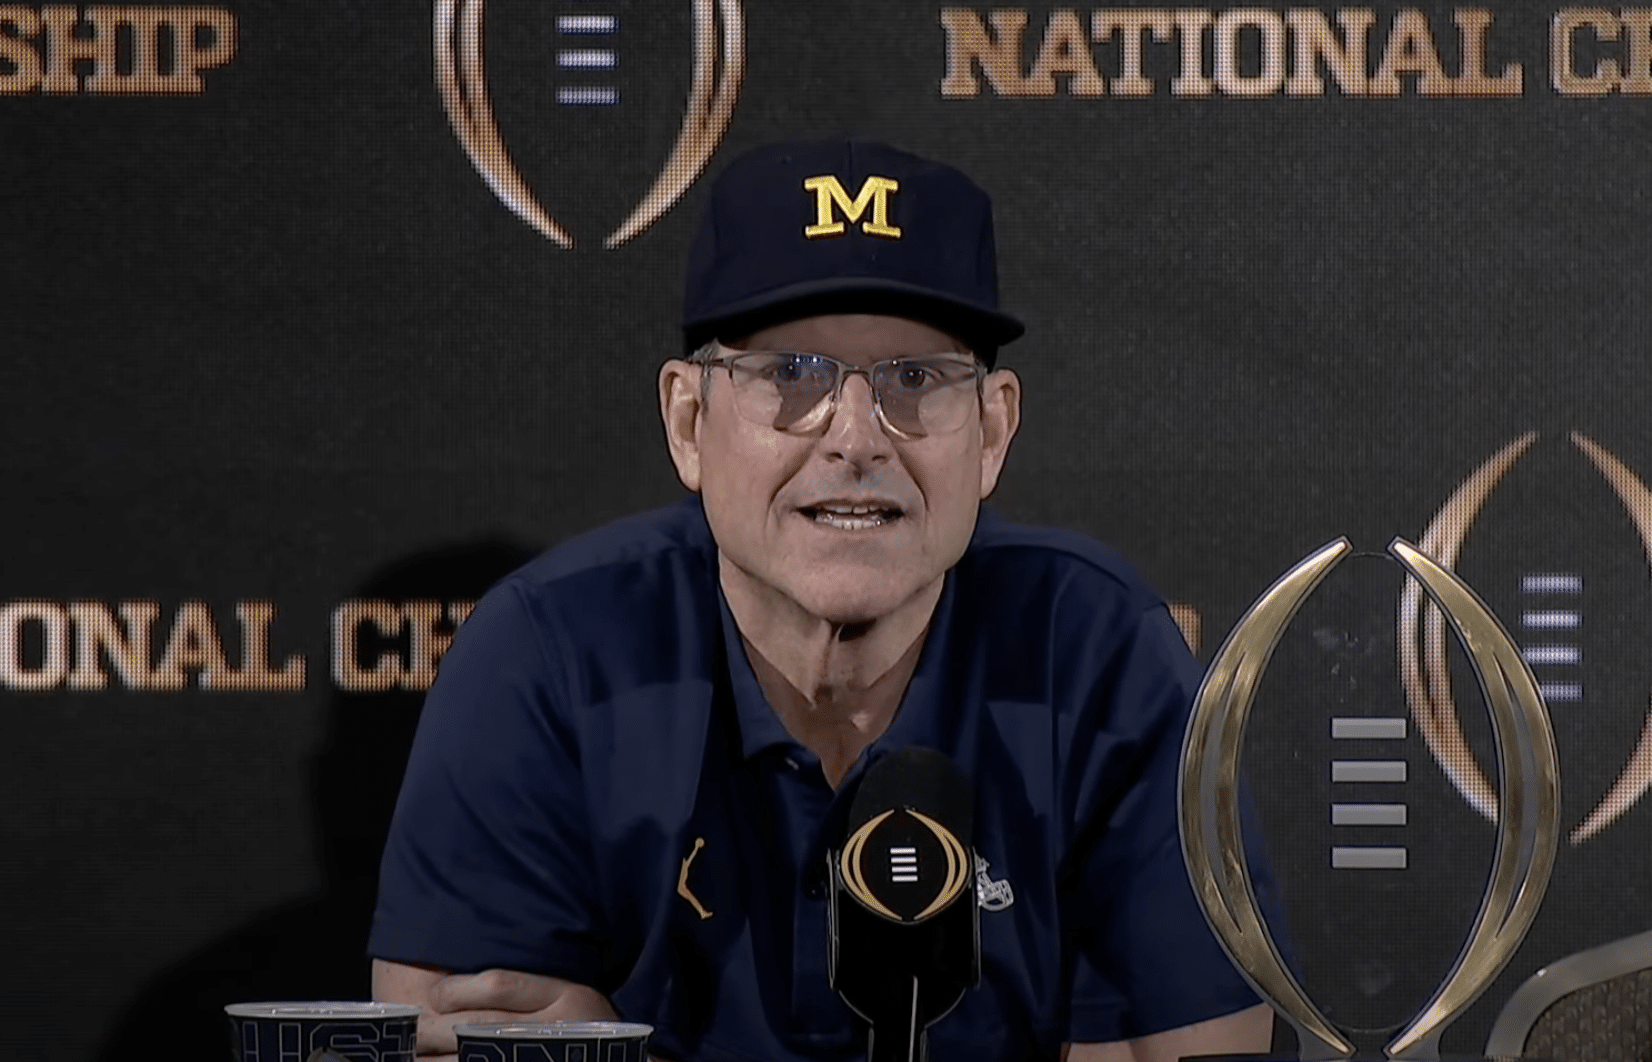 Jim Harbaugh reveals tattoo he will get NCAA President weighs in on fairness of Michigan  Michigan head coach Jim Harbaugh lands interview